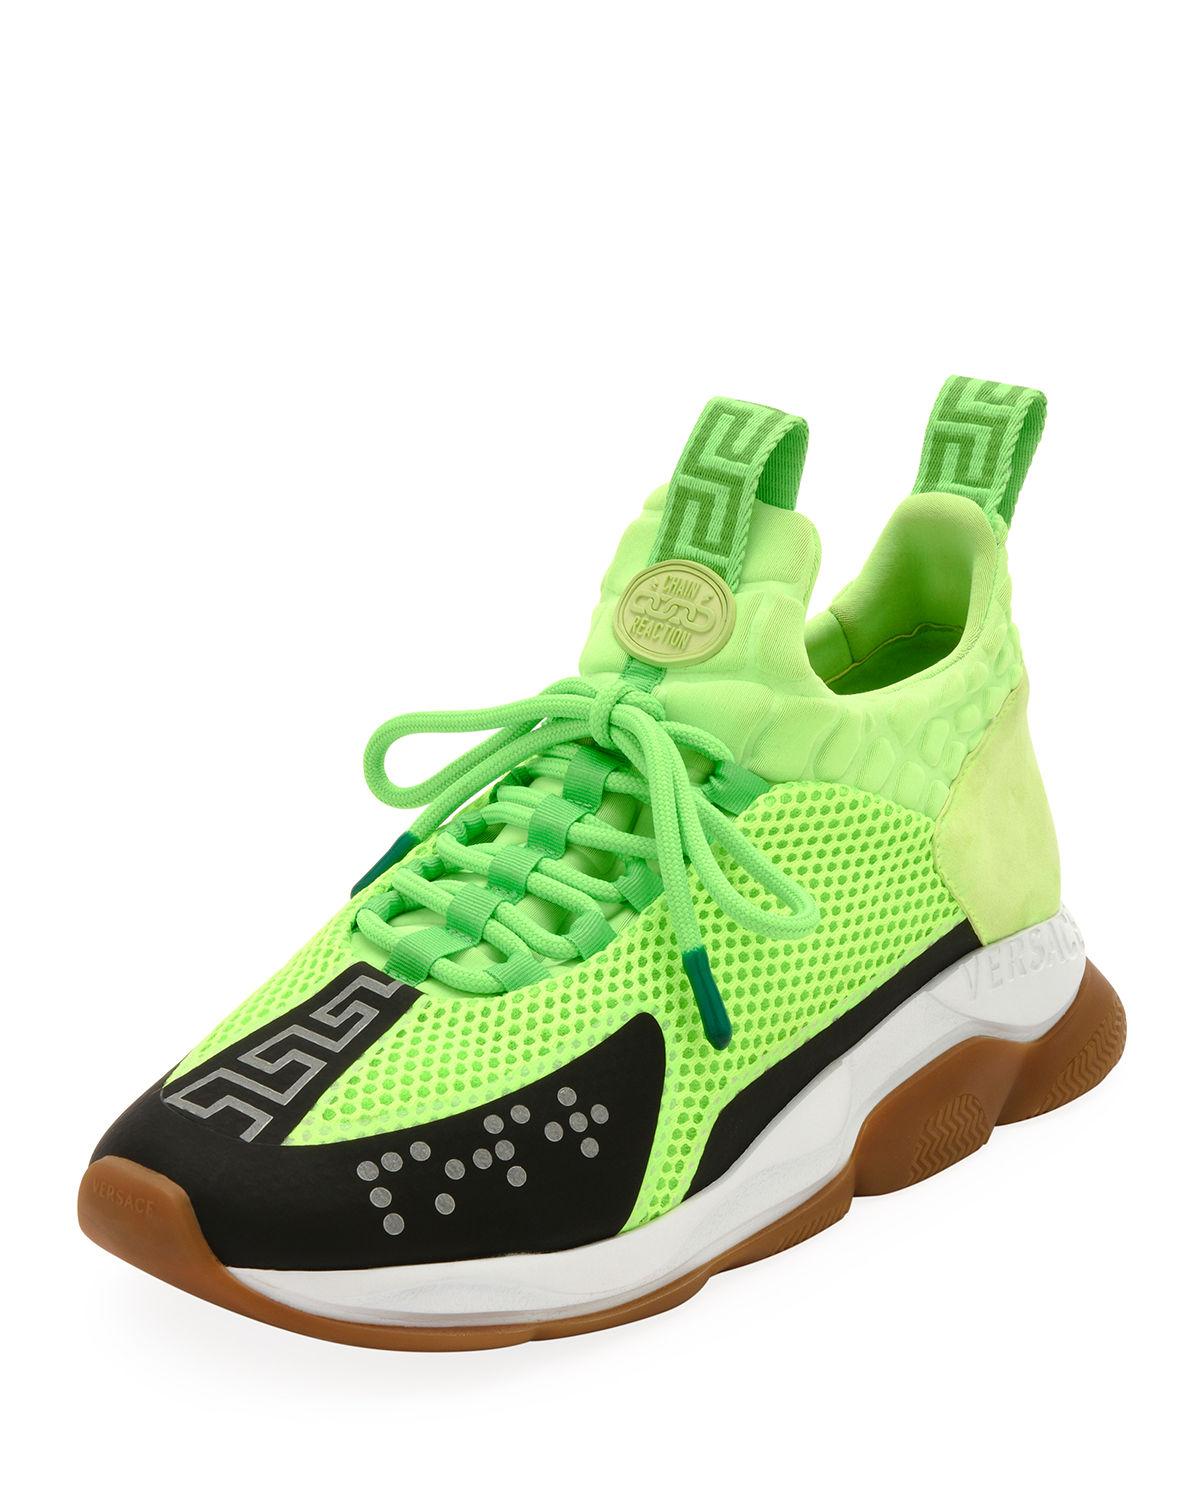 versace lime green shoes